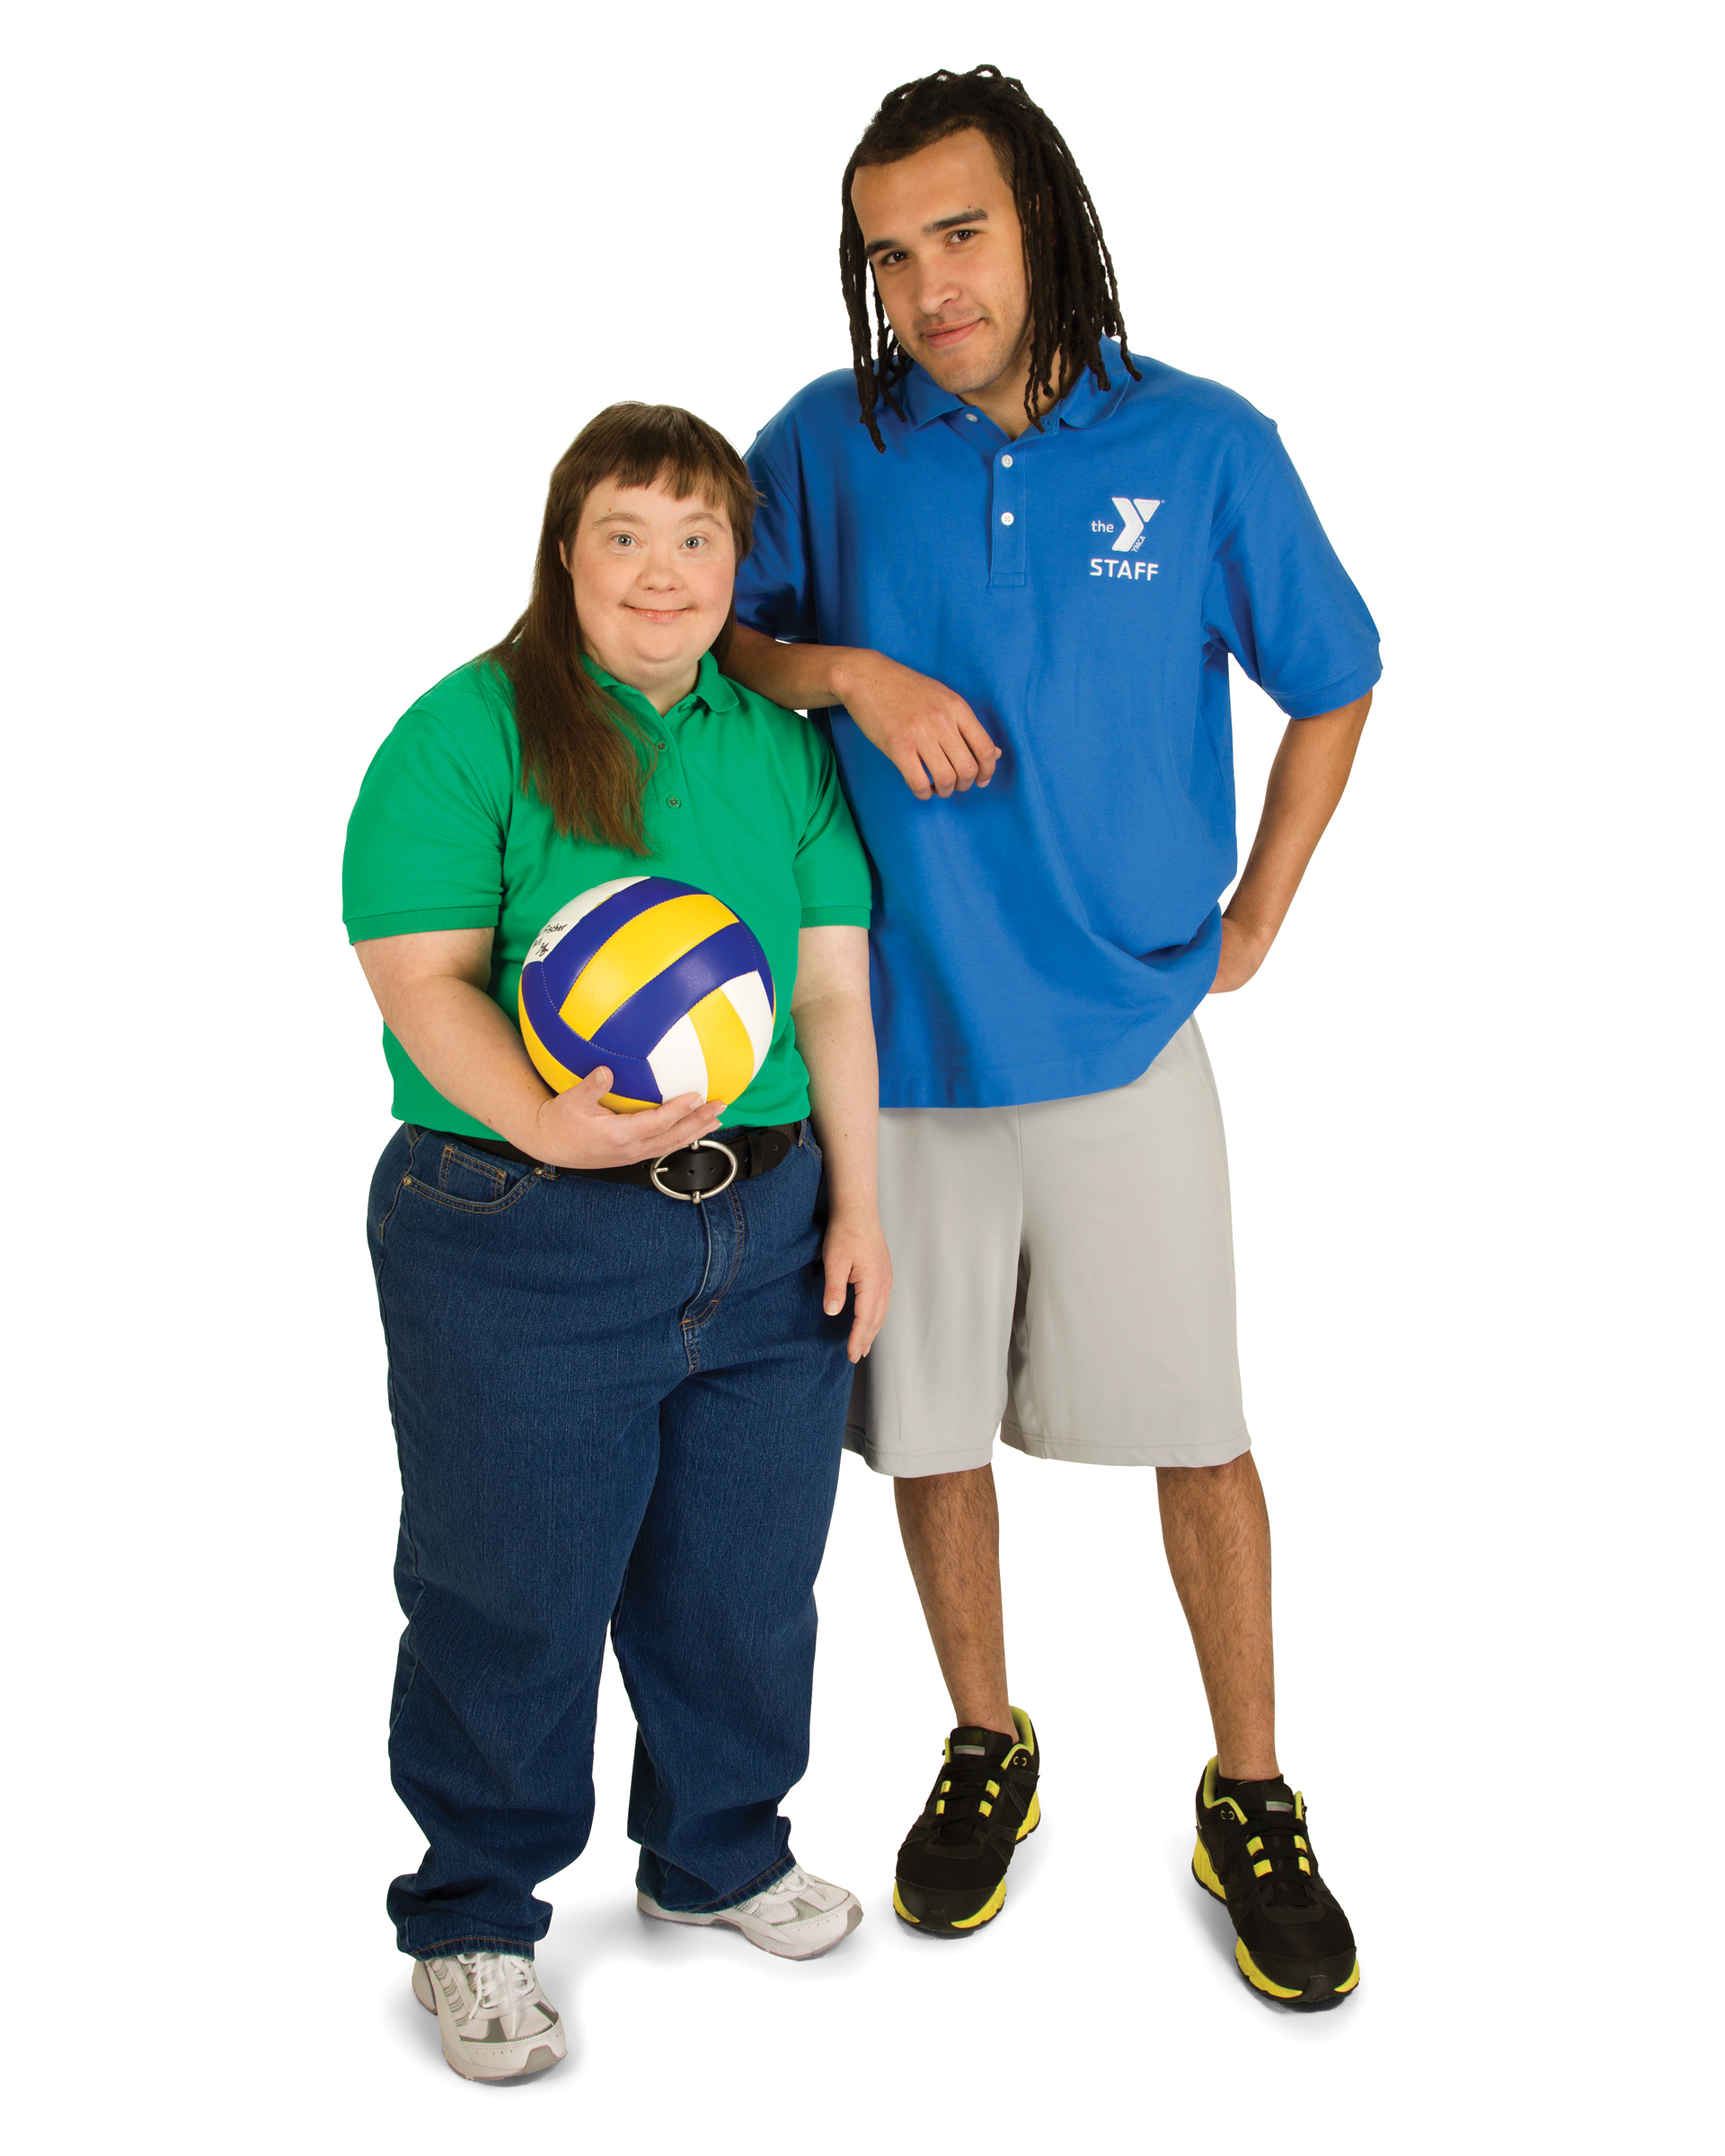 Child with special needs playing sports at the YMCA